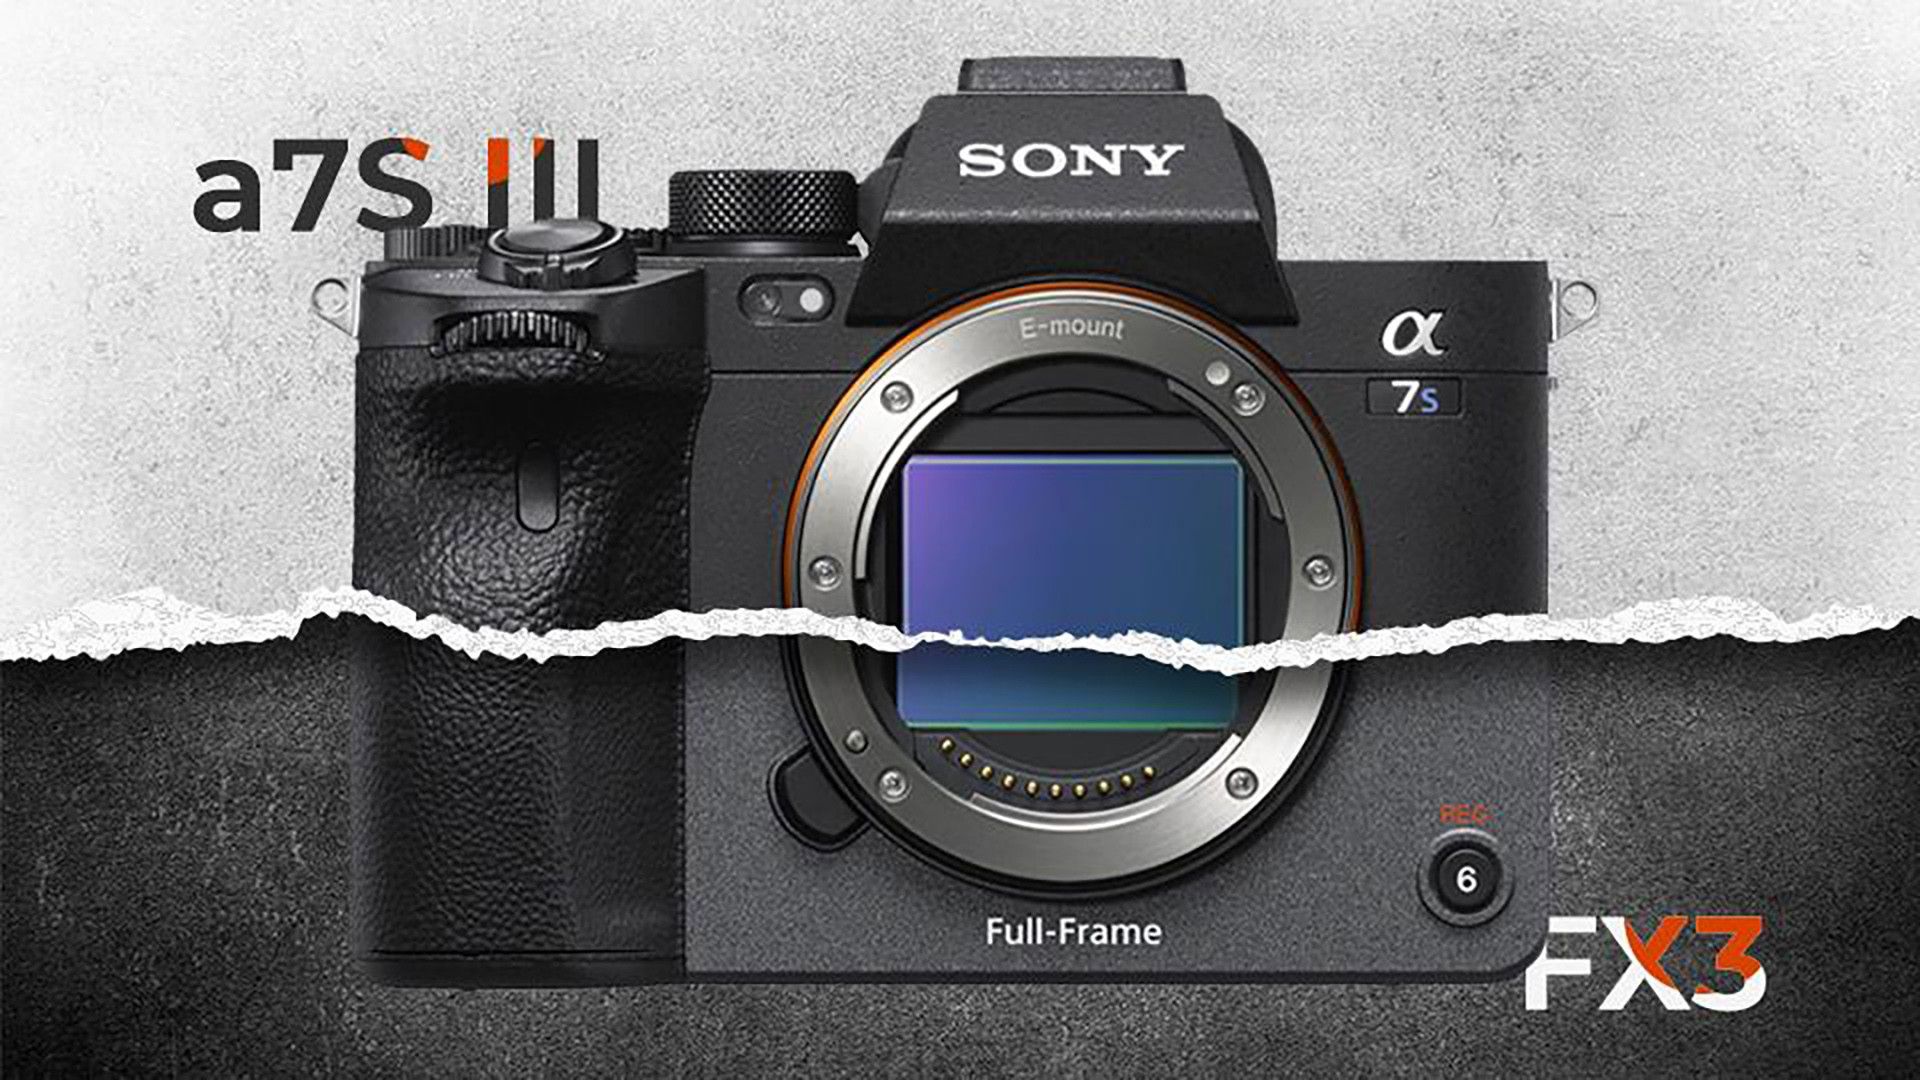 Sony a7S III vs FX3: Which Compact Cinema Option Is Best for You?